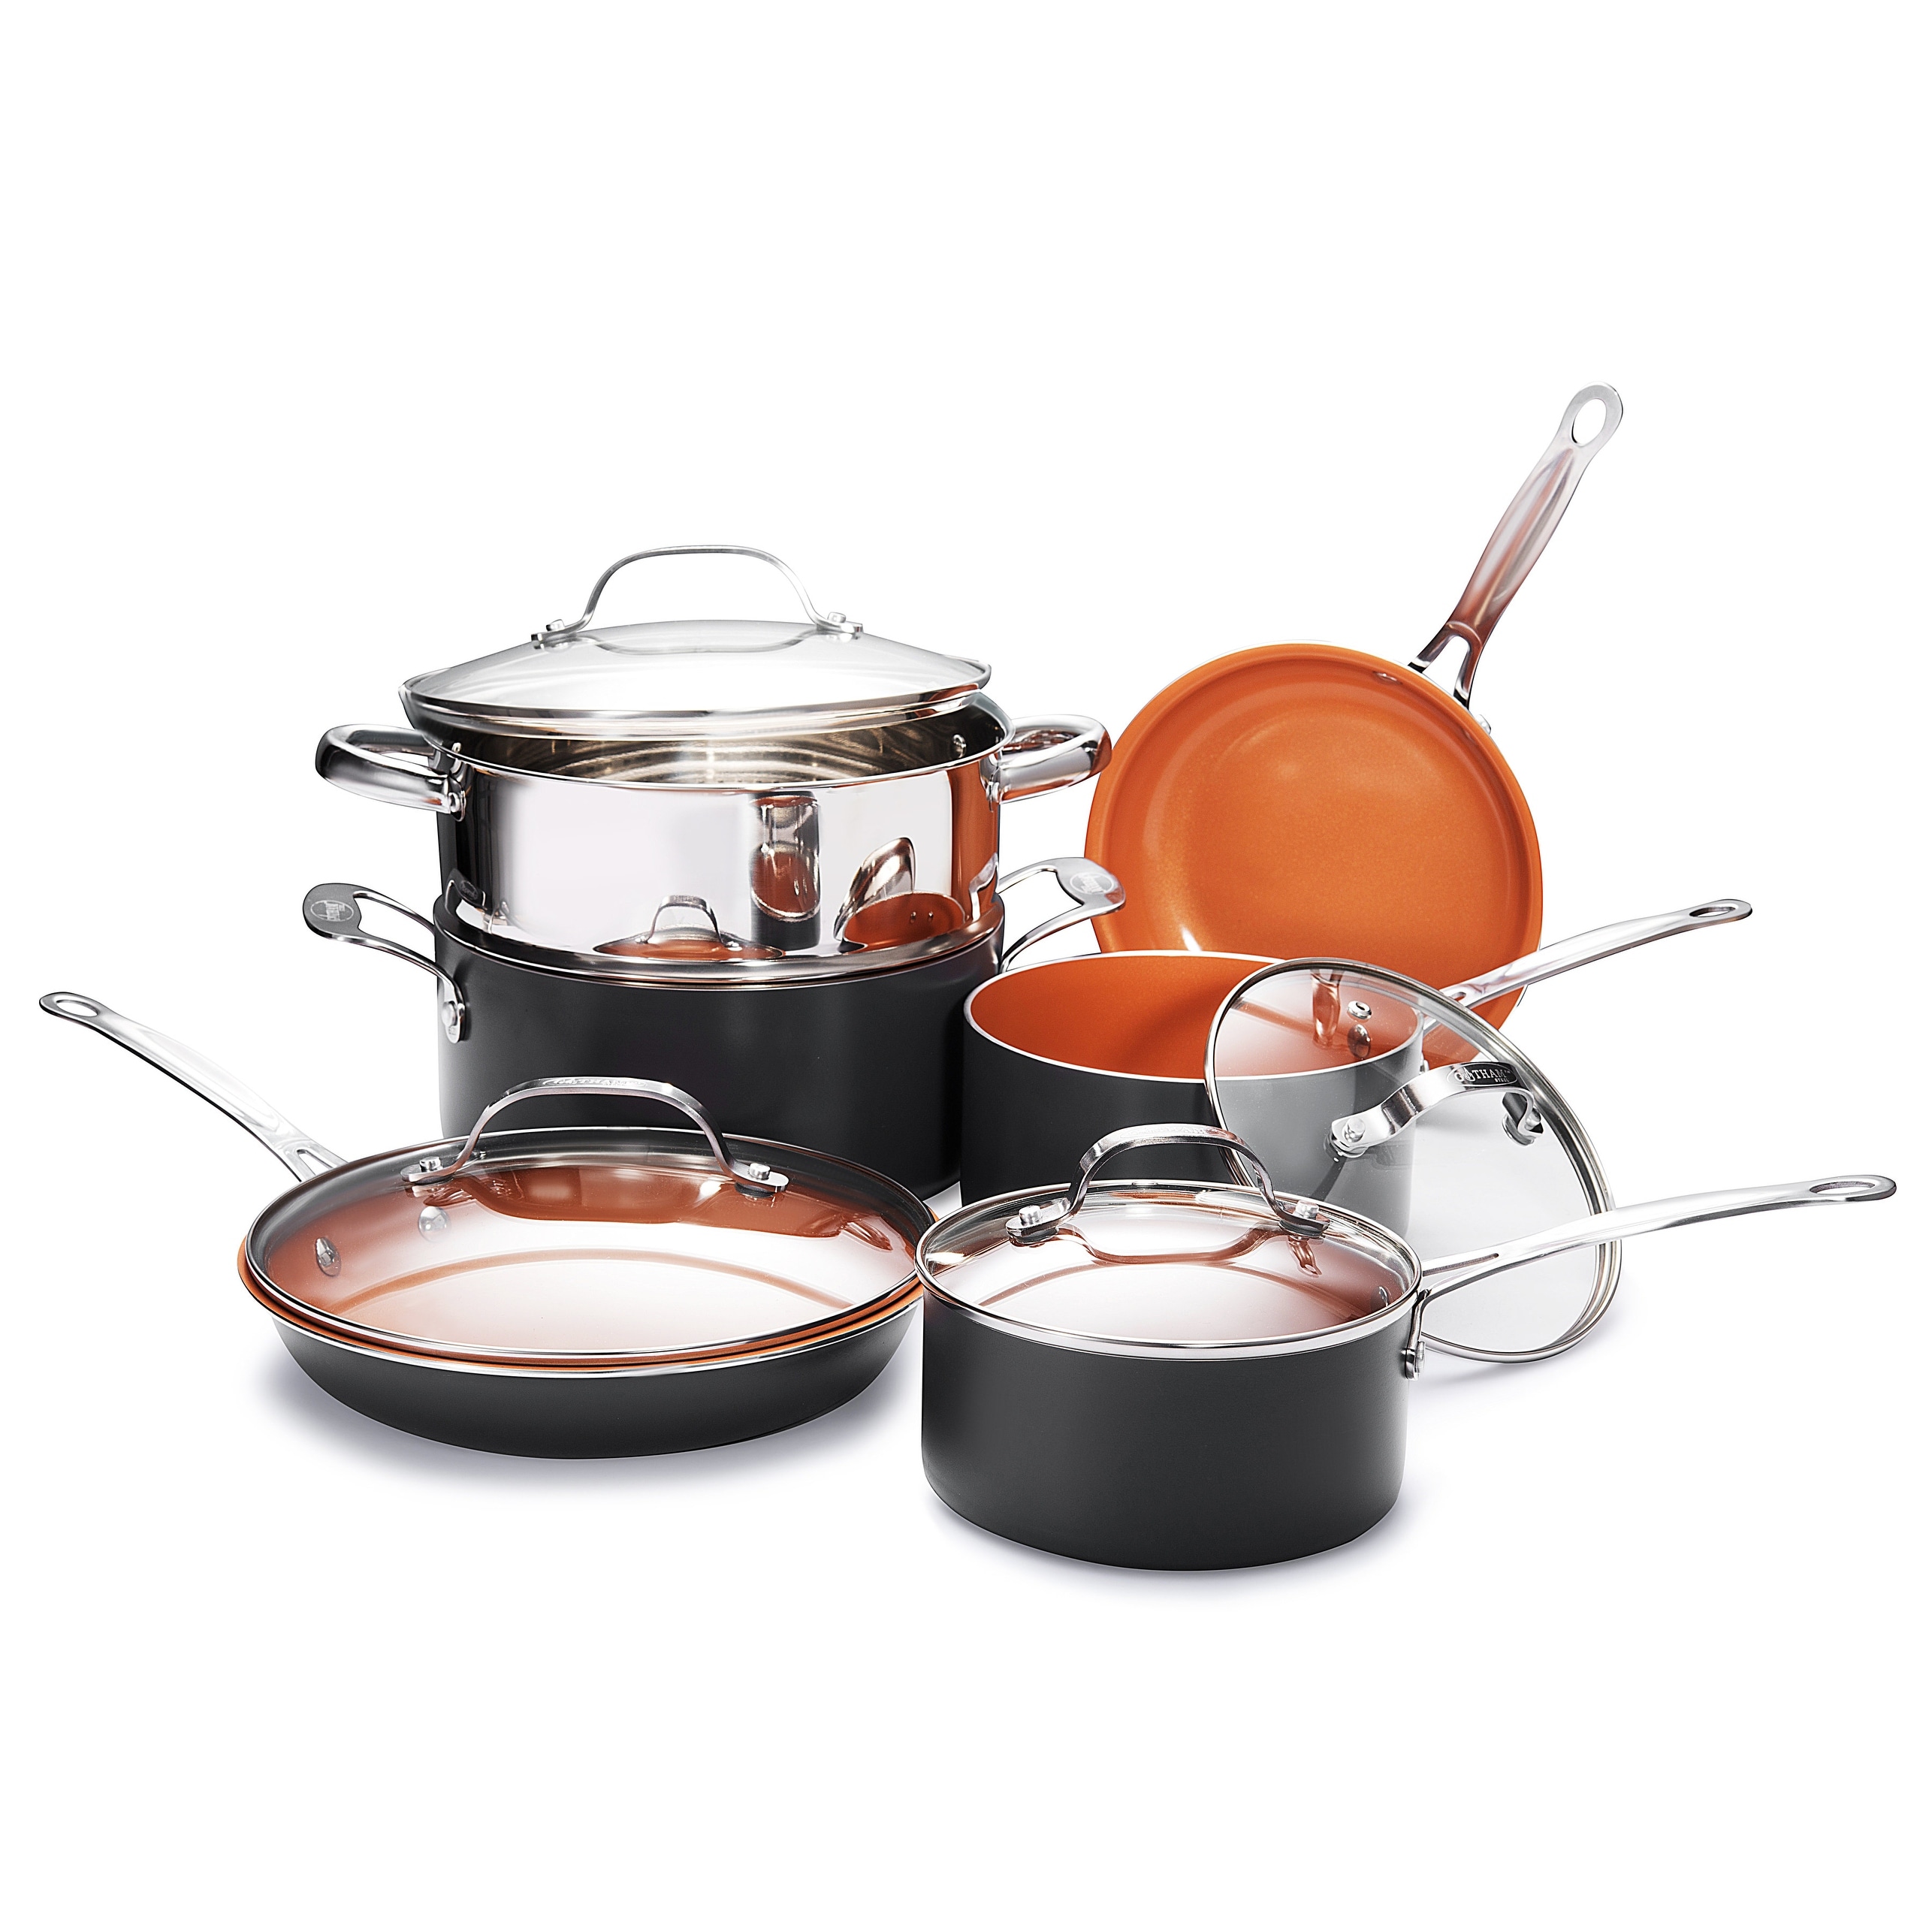 https://ak1.ostkcdn.com/images/products/is/images/direct/9b7dc2cc4f182caf8b920f14ae616bf1e2b6821b/Gotham-Steel-Non-stick-Ti-Cerama-10-Piece-Set.jpg